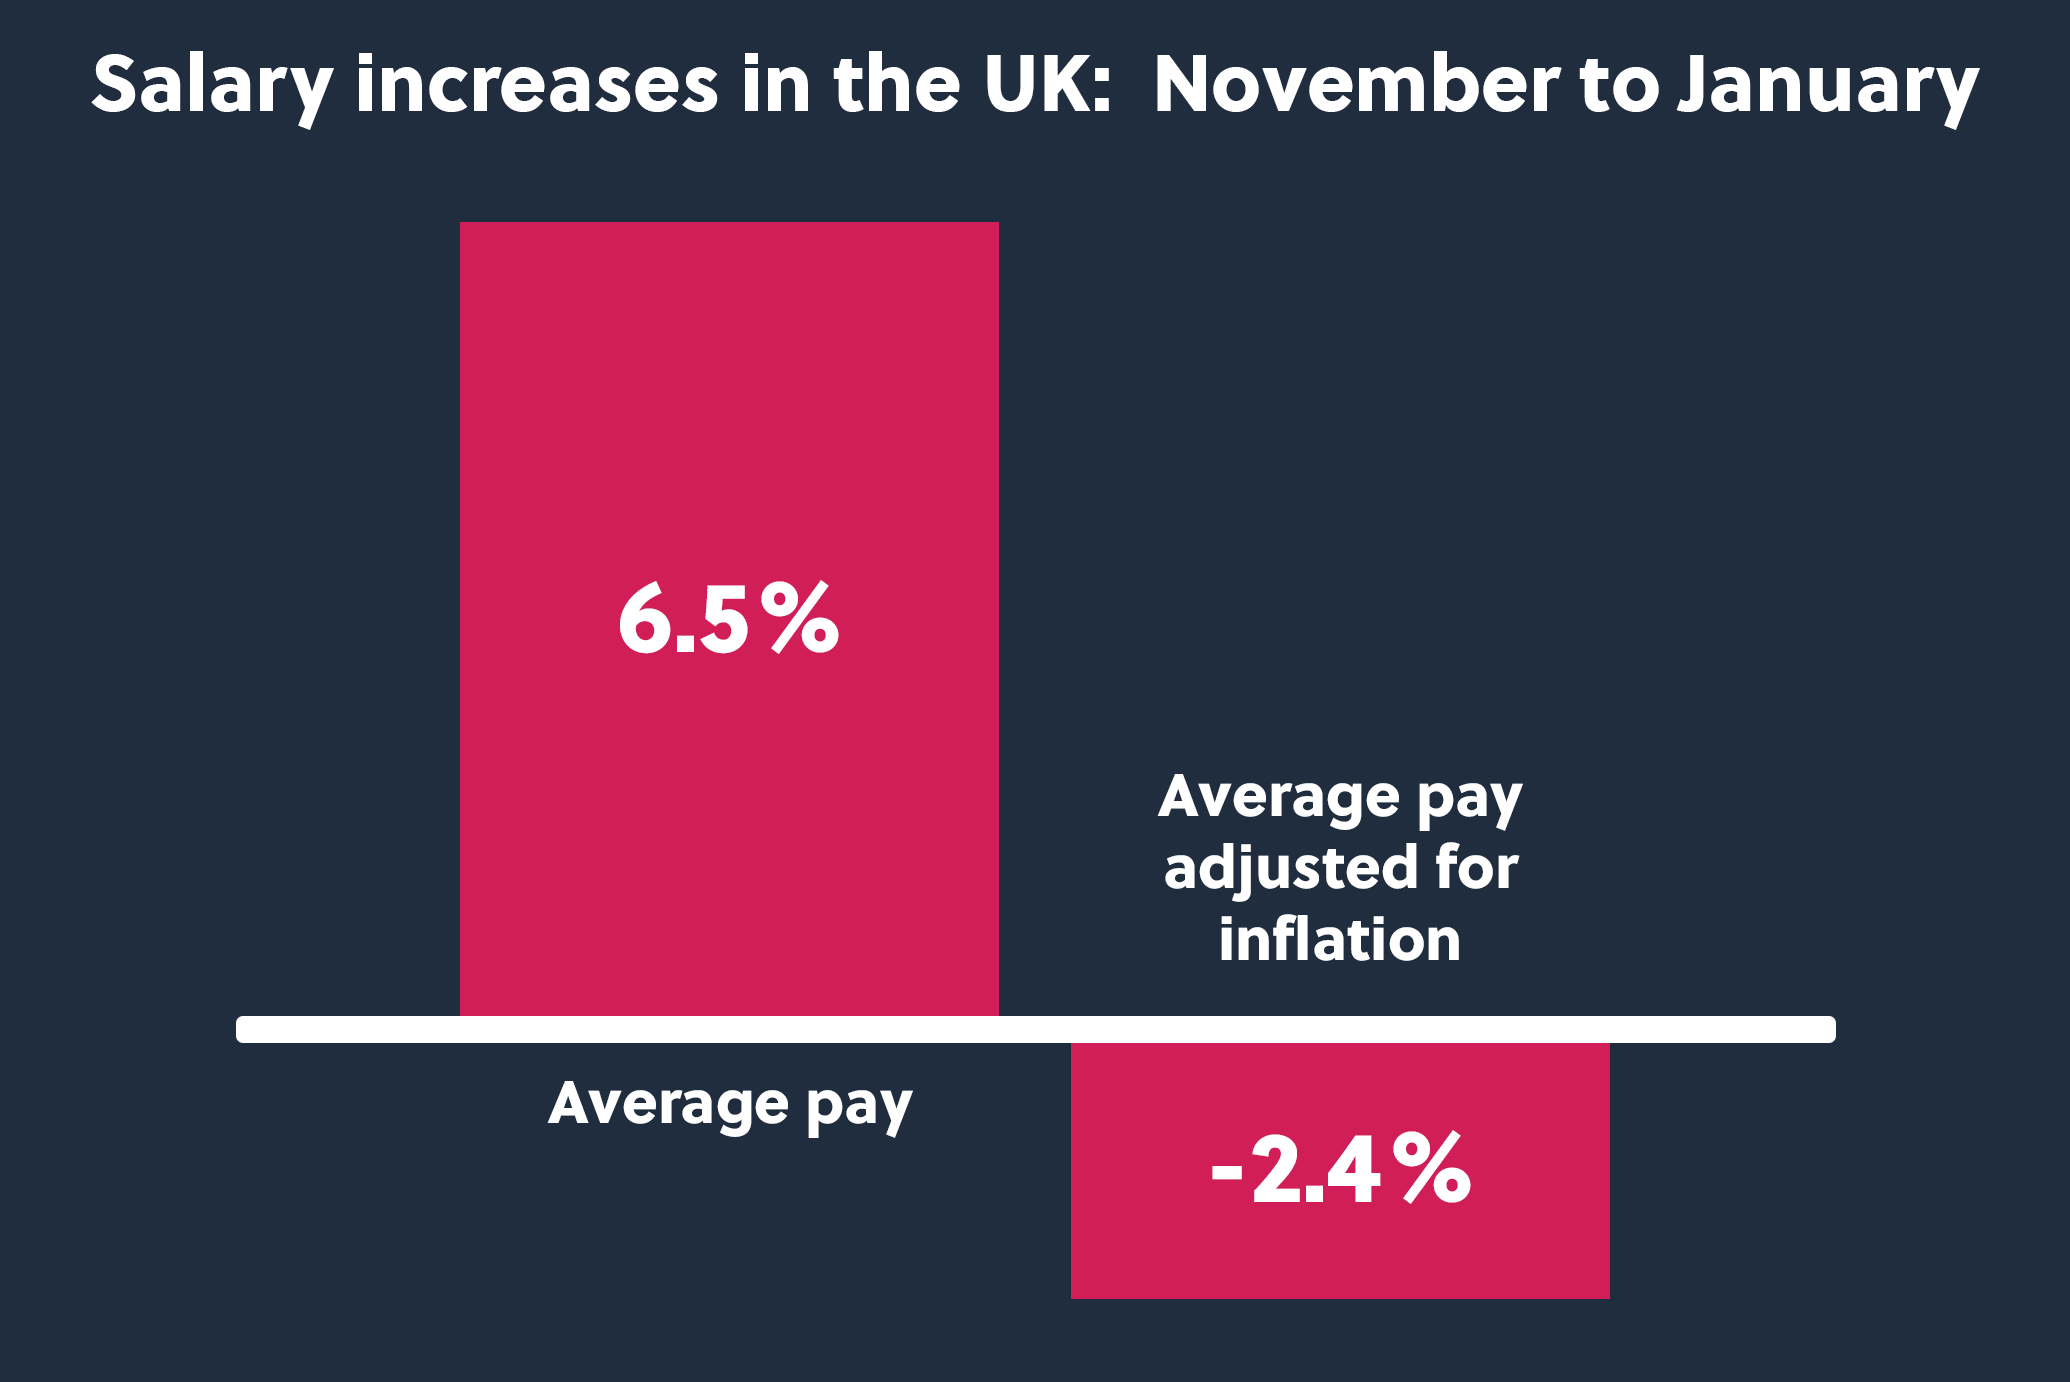 Graphic showing salary increases from November to January and adjusted for inflation in red bars and blue navy background